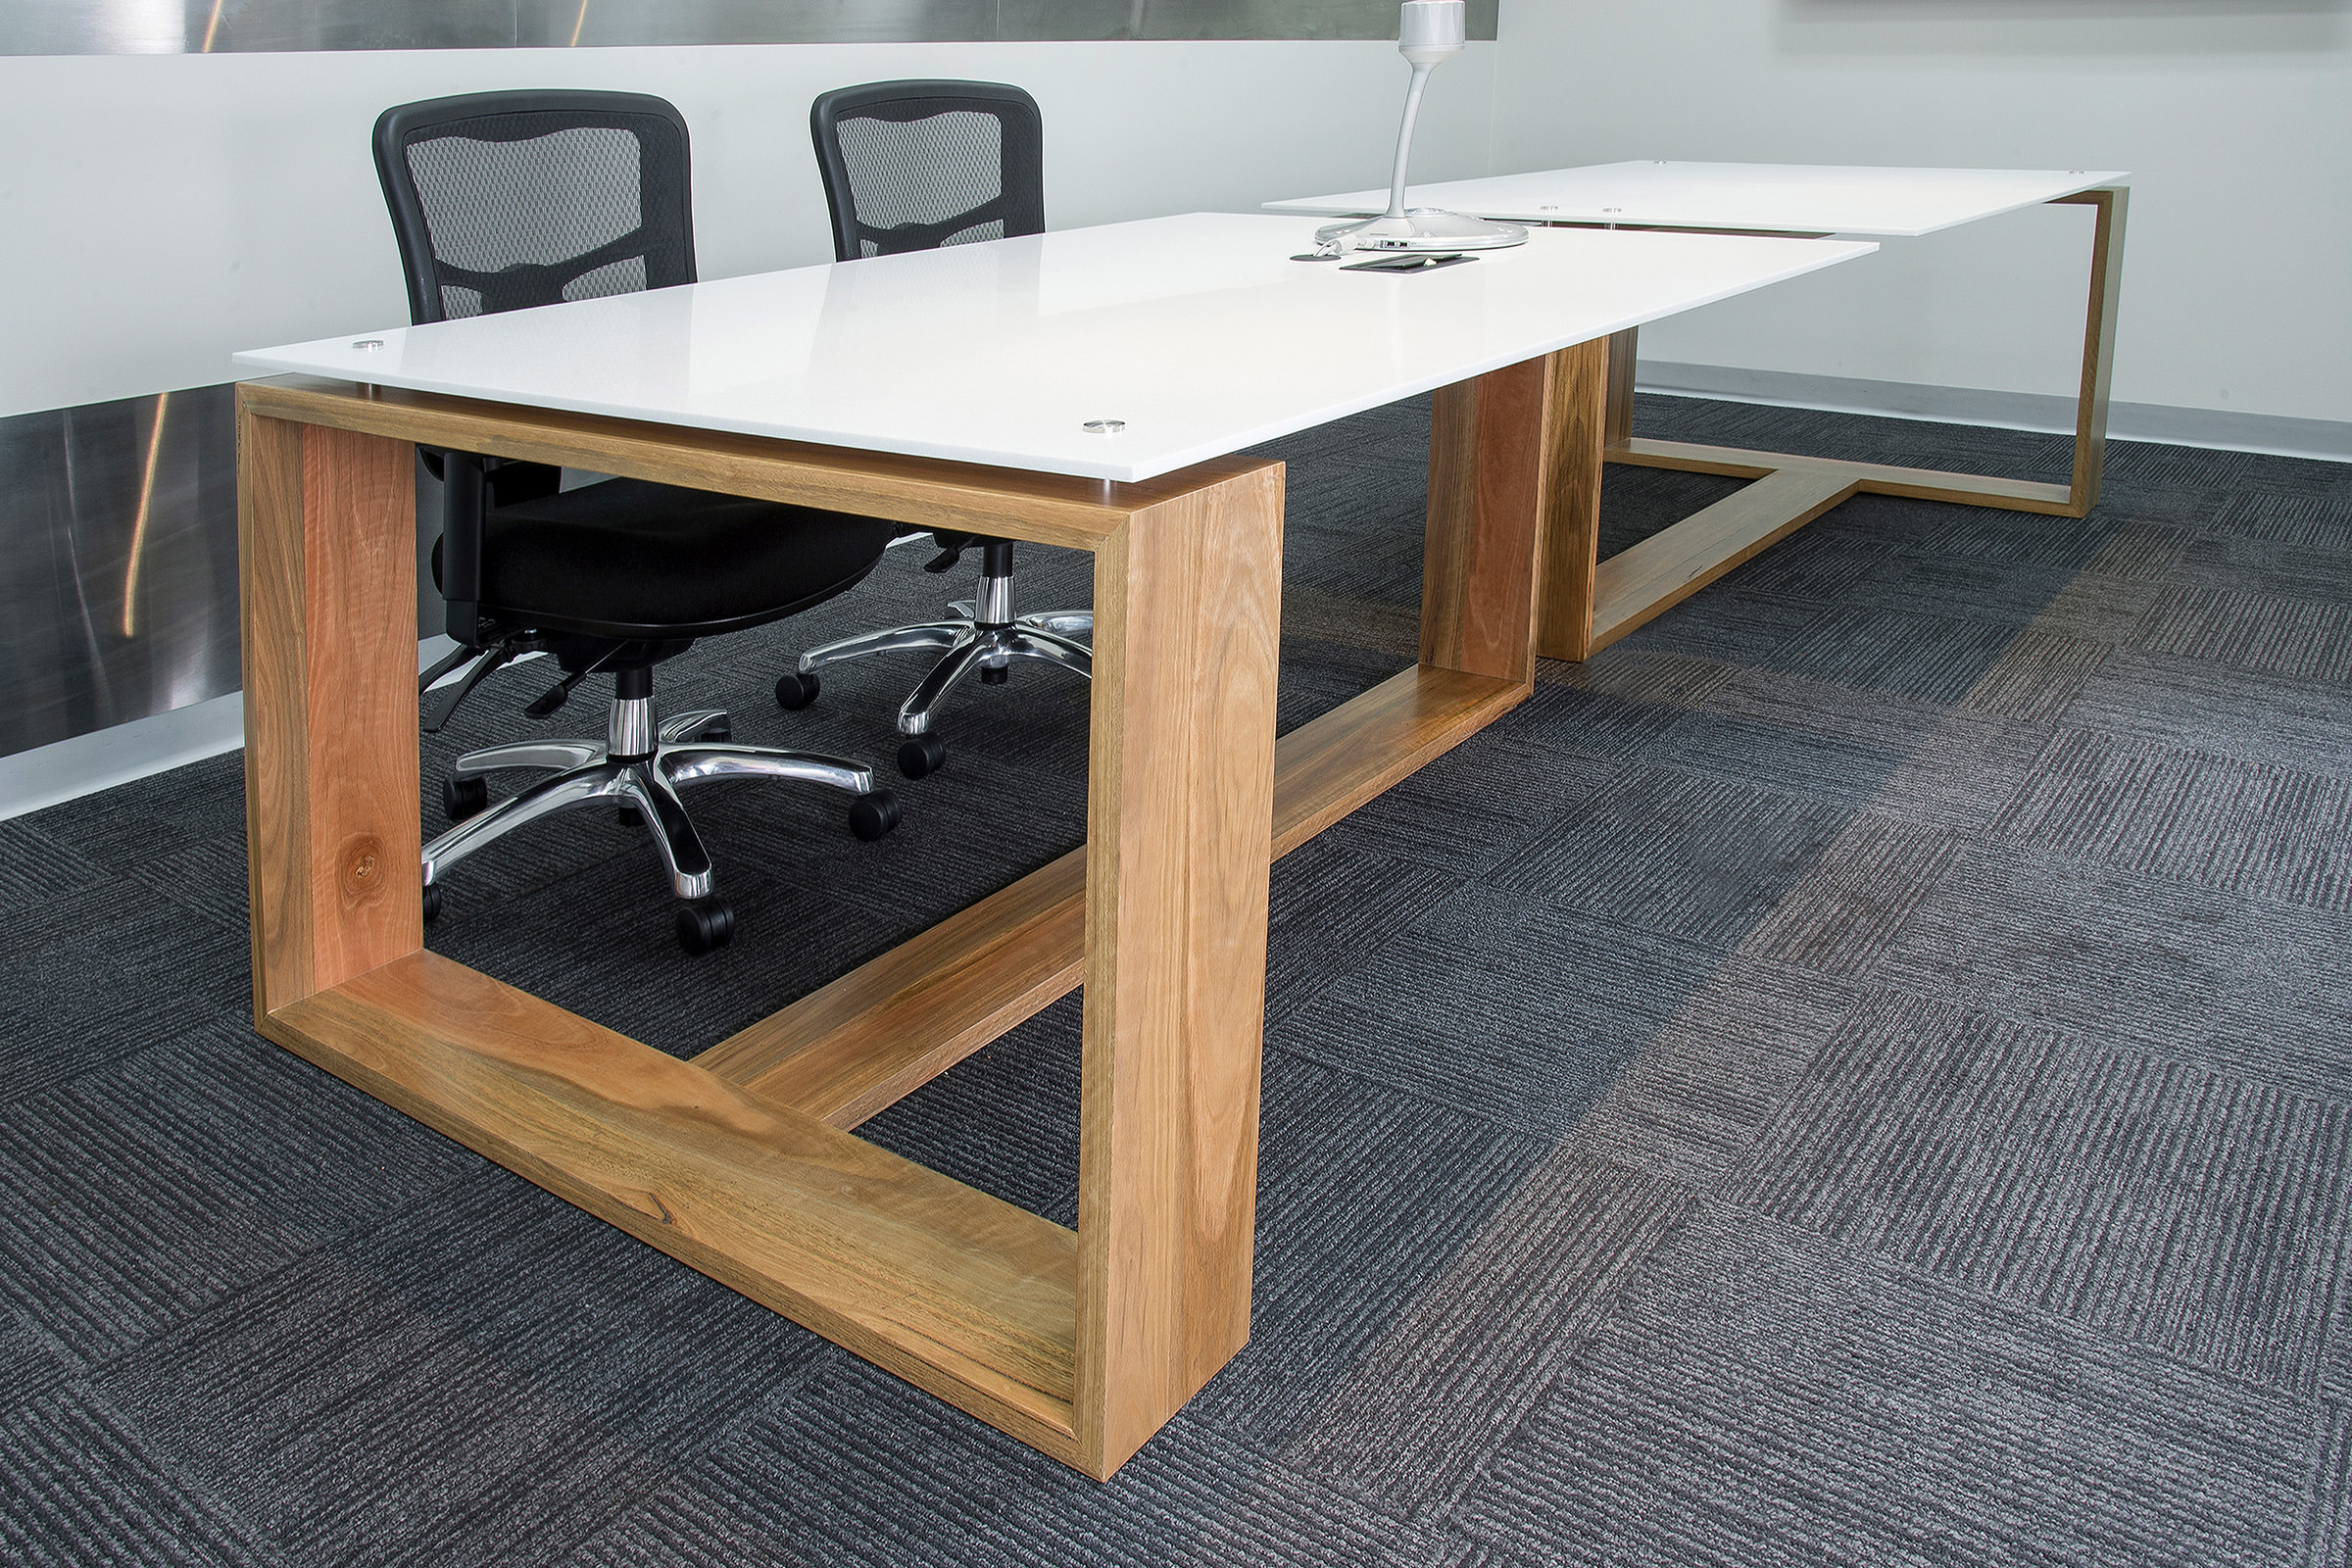 A long day at the office is made more comfortable with this designer table by Australian designer FrancoCrea